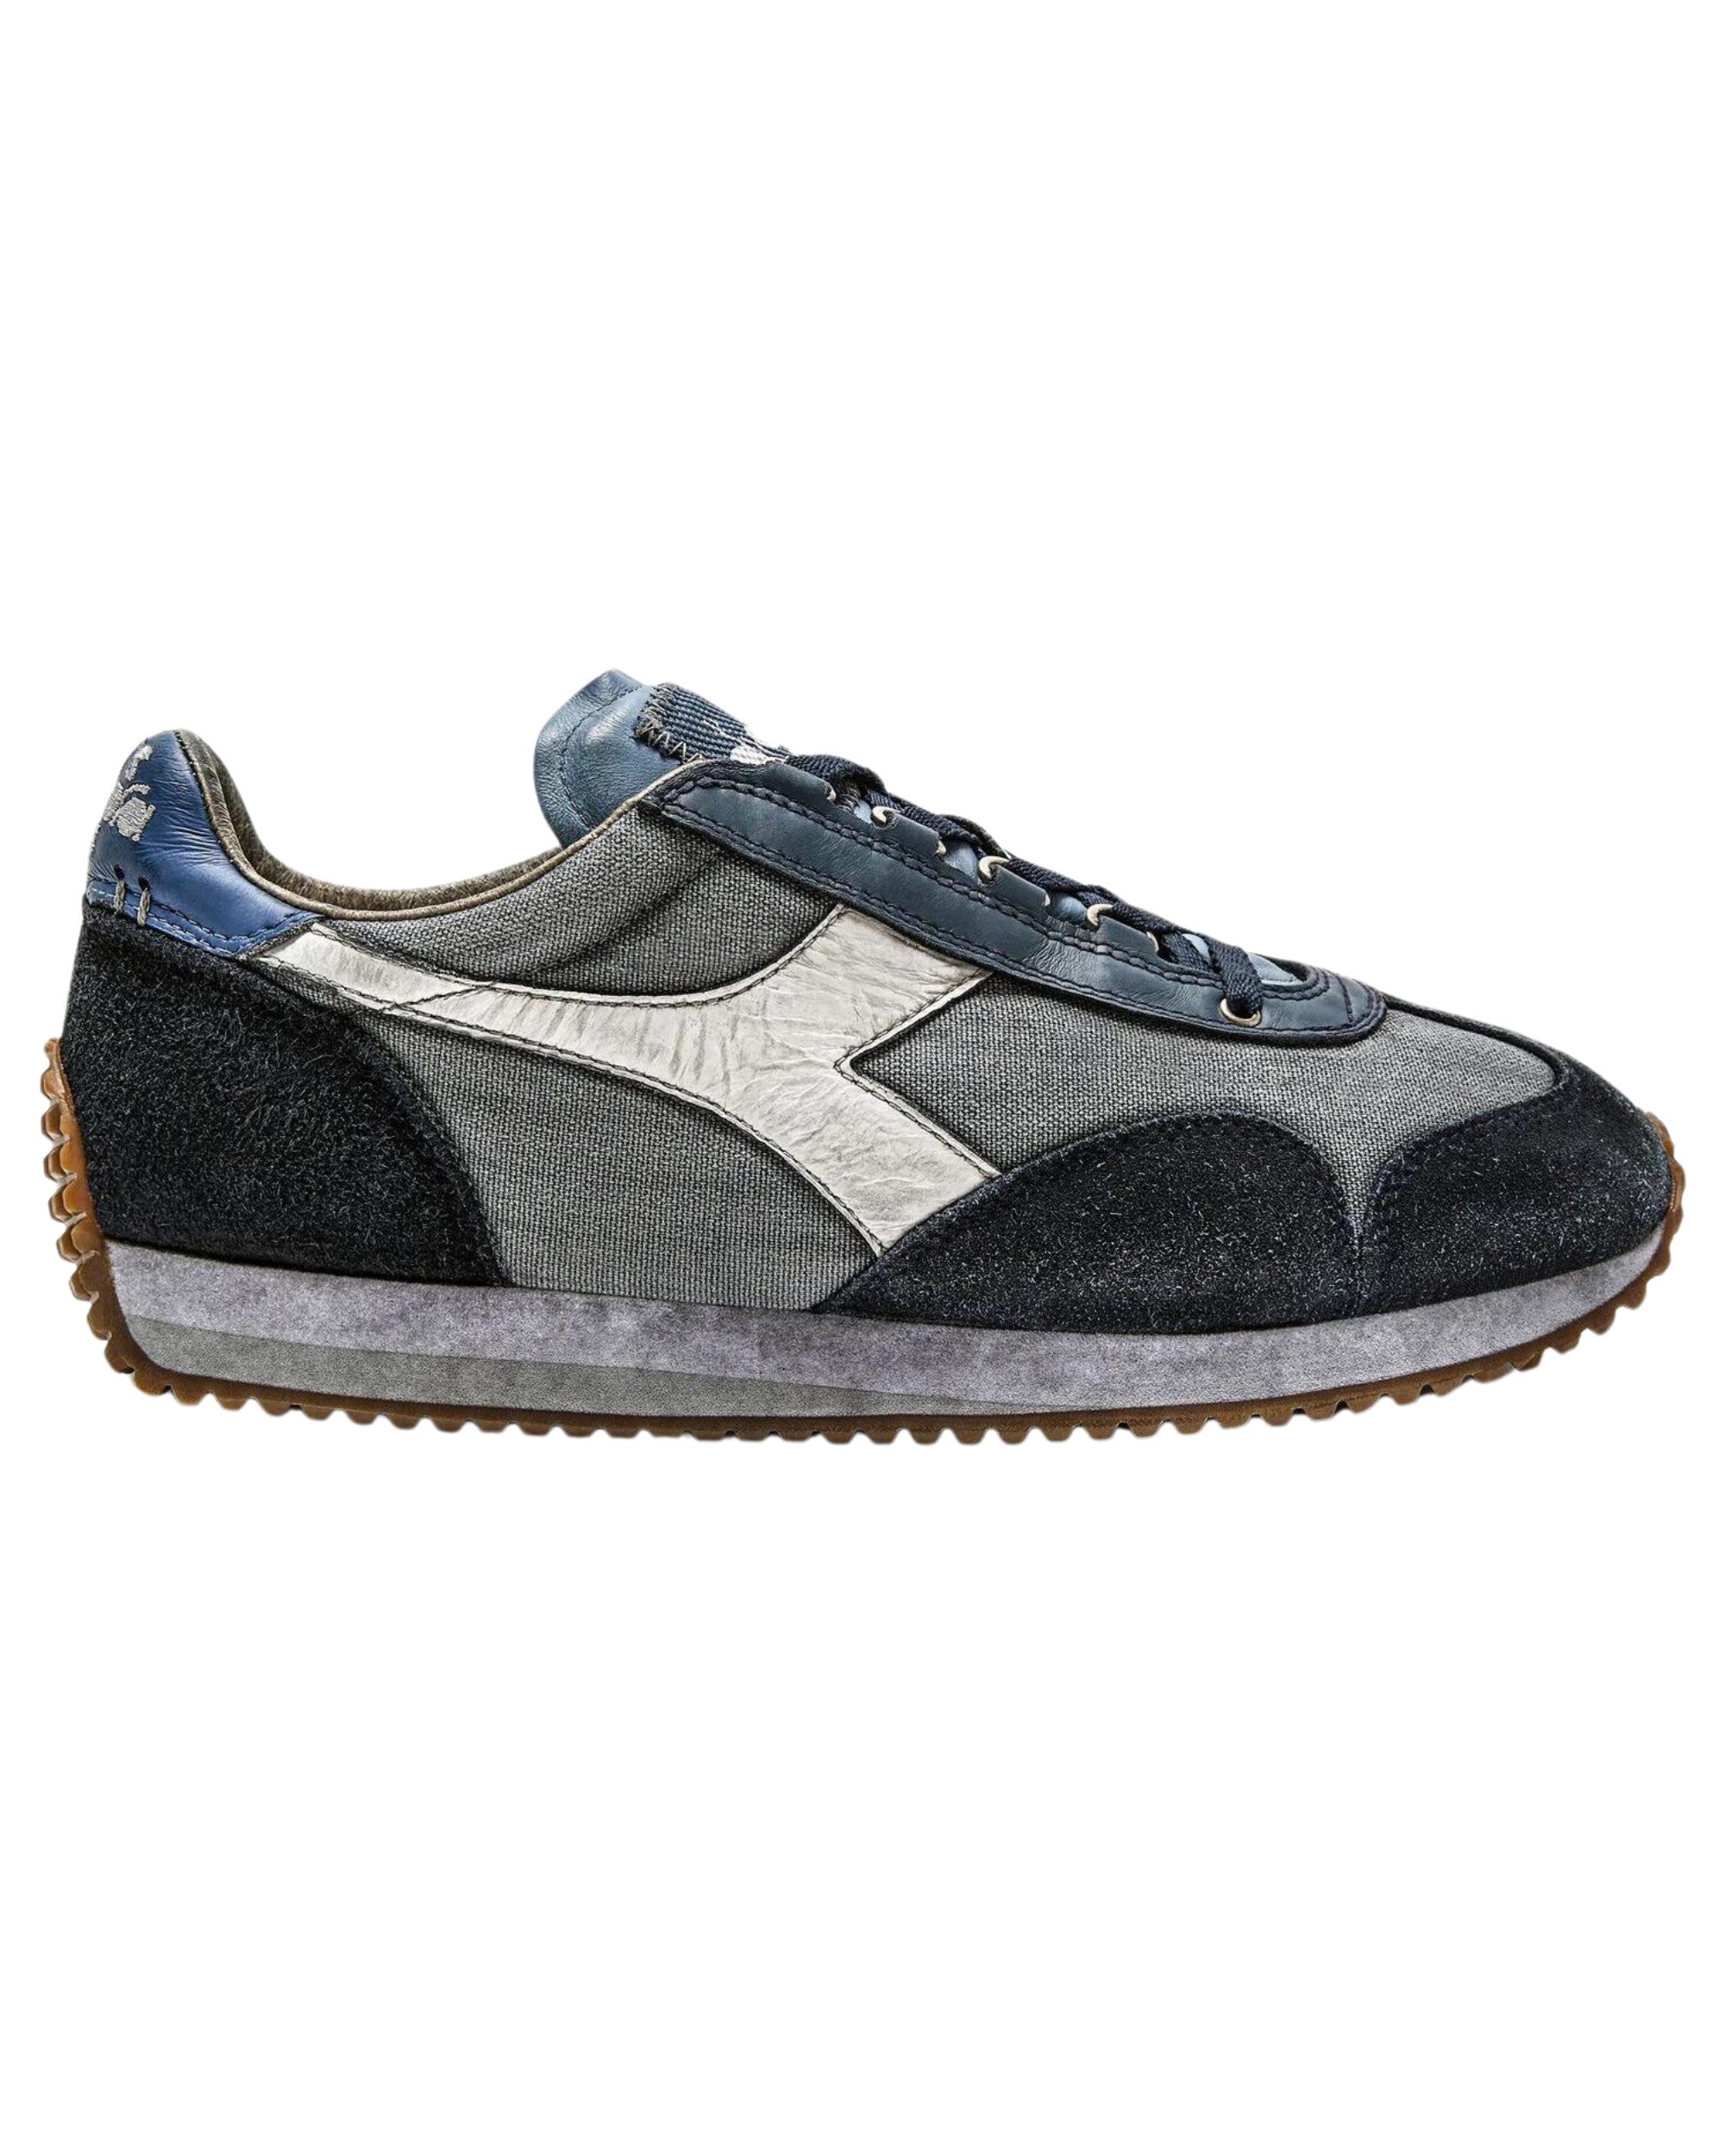 Pre-owned Diadora Heritage Shoes Equipe H Dirty Stone Wash Evo Trainers Leather Blend